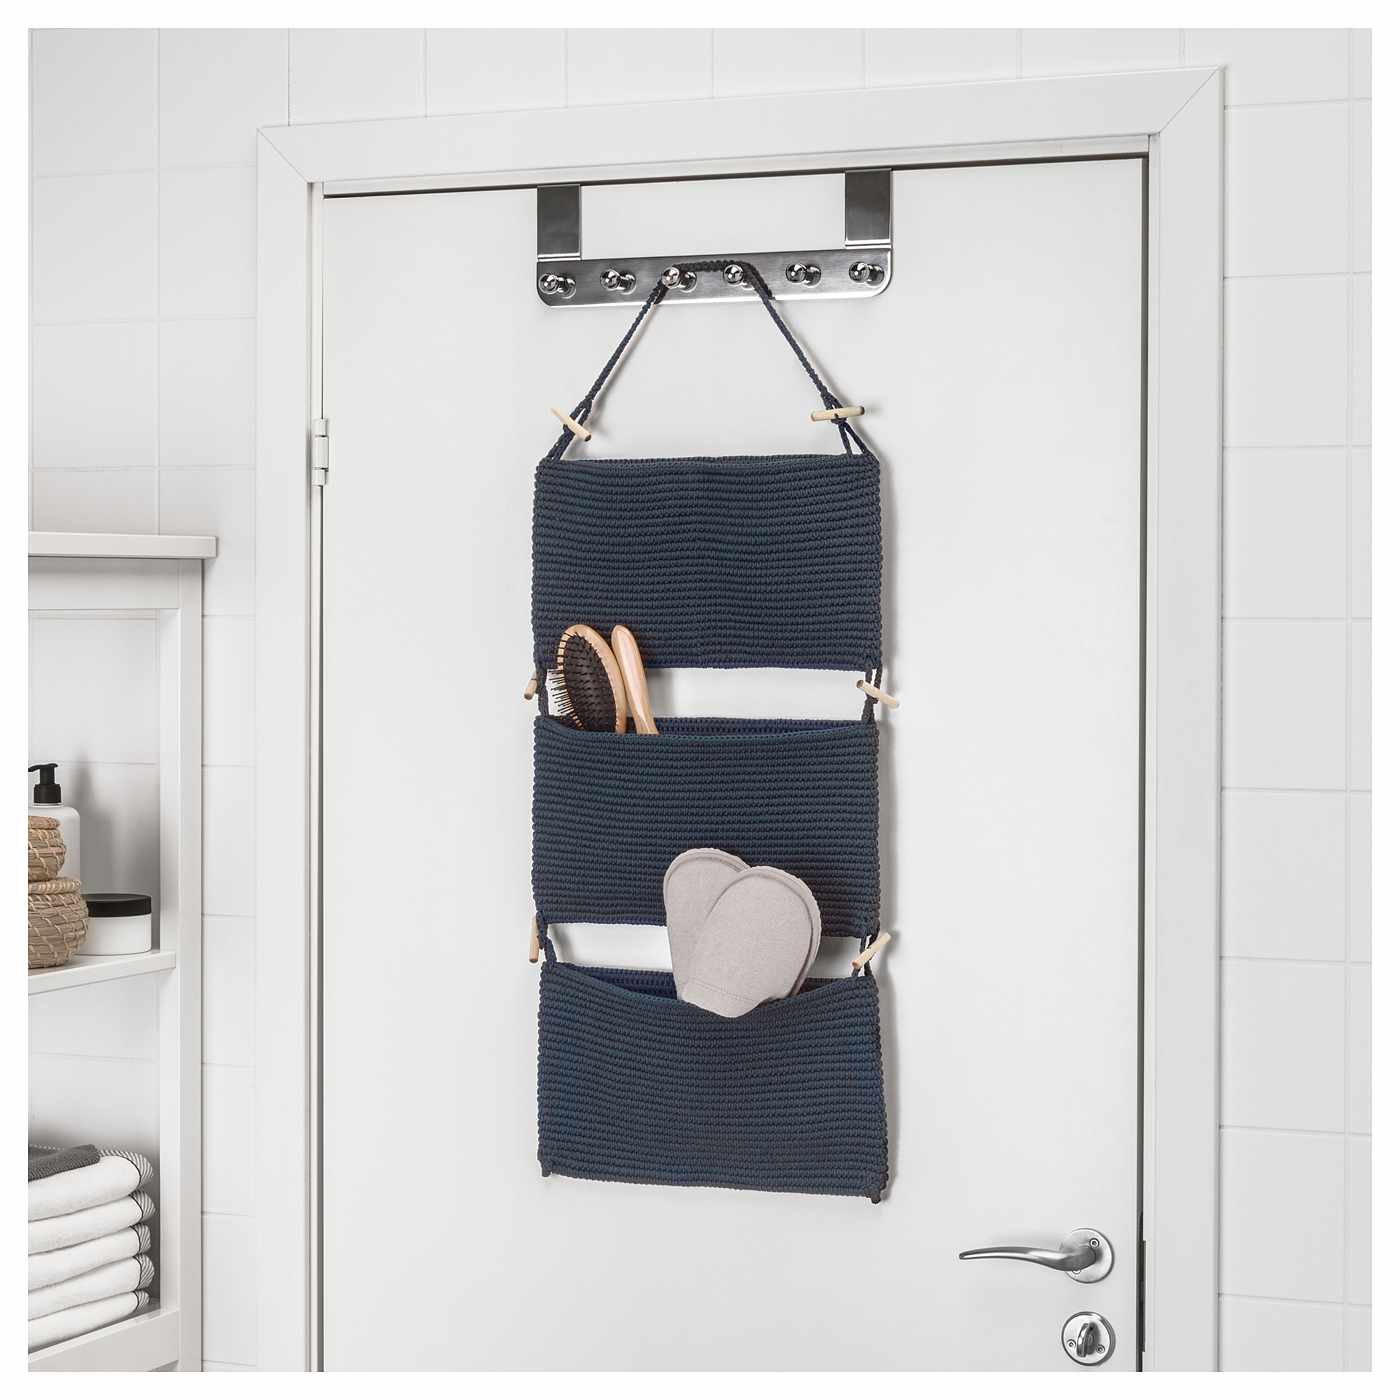 More storage space in the small bathroom offers clever space-saving ideas by Ikea